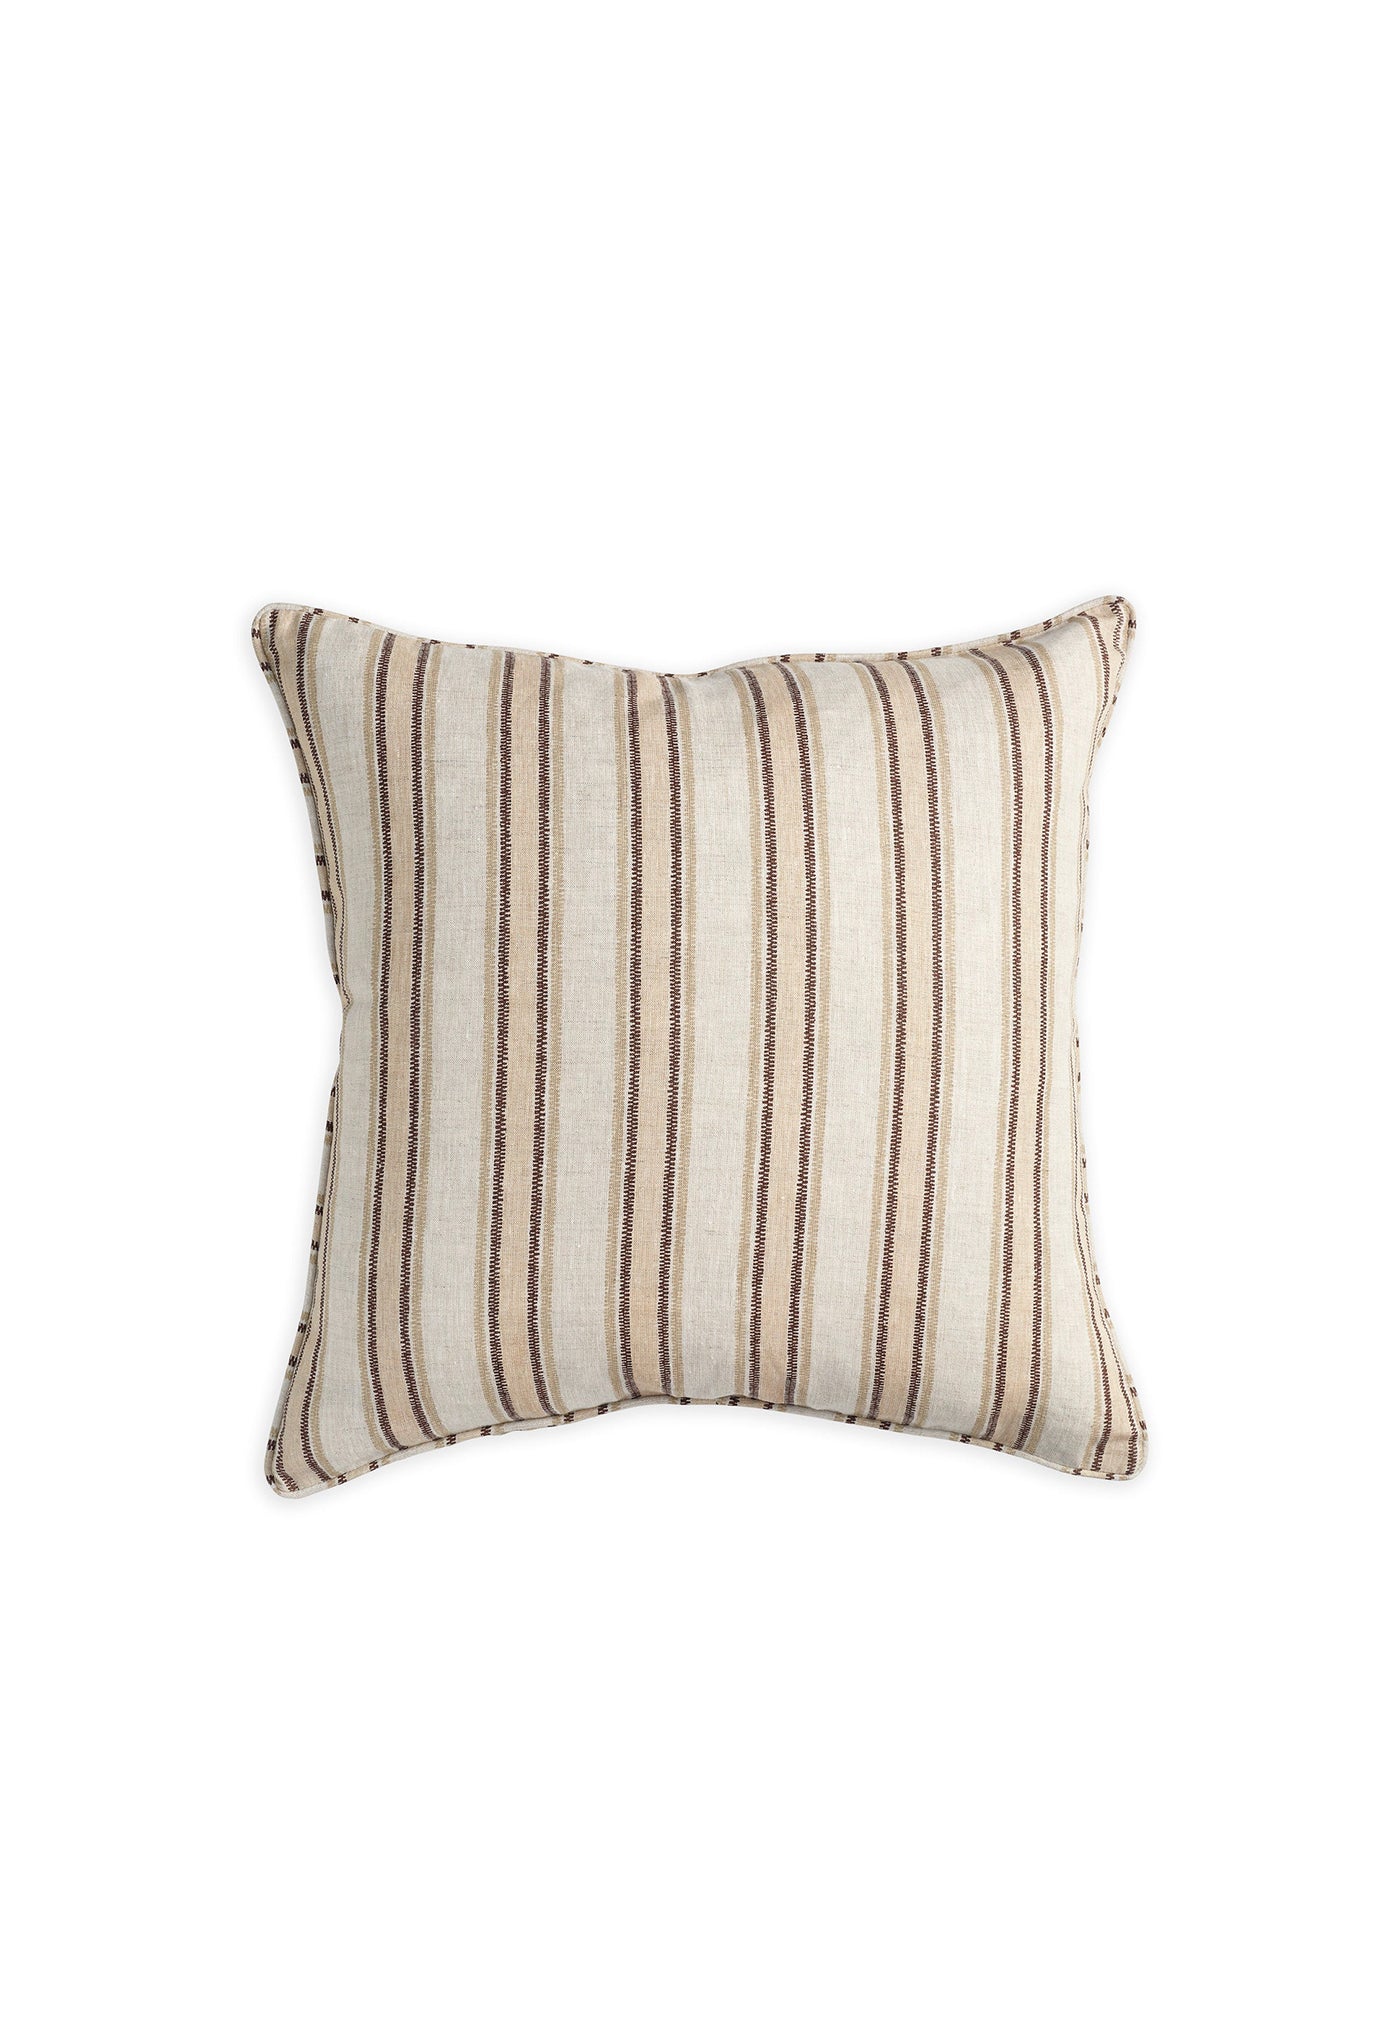 Lido Shell Linen Cushion 55x55cm sold by Angel Divine